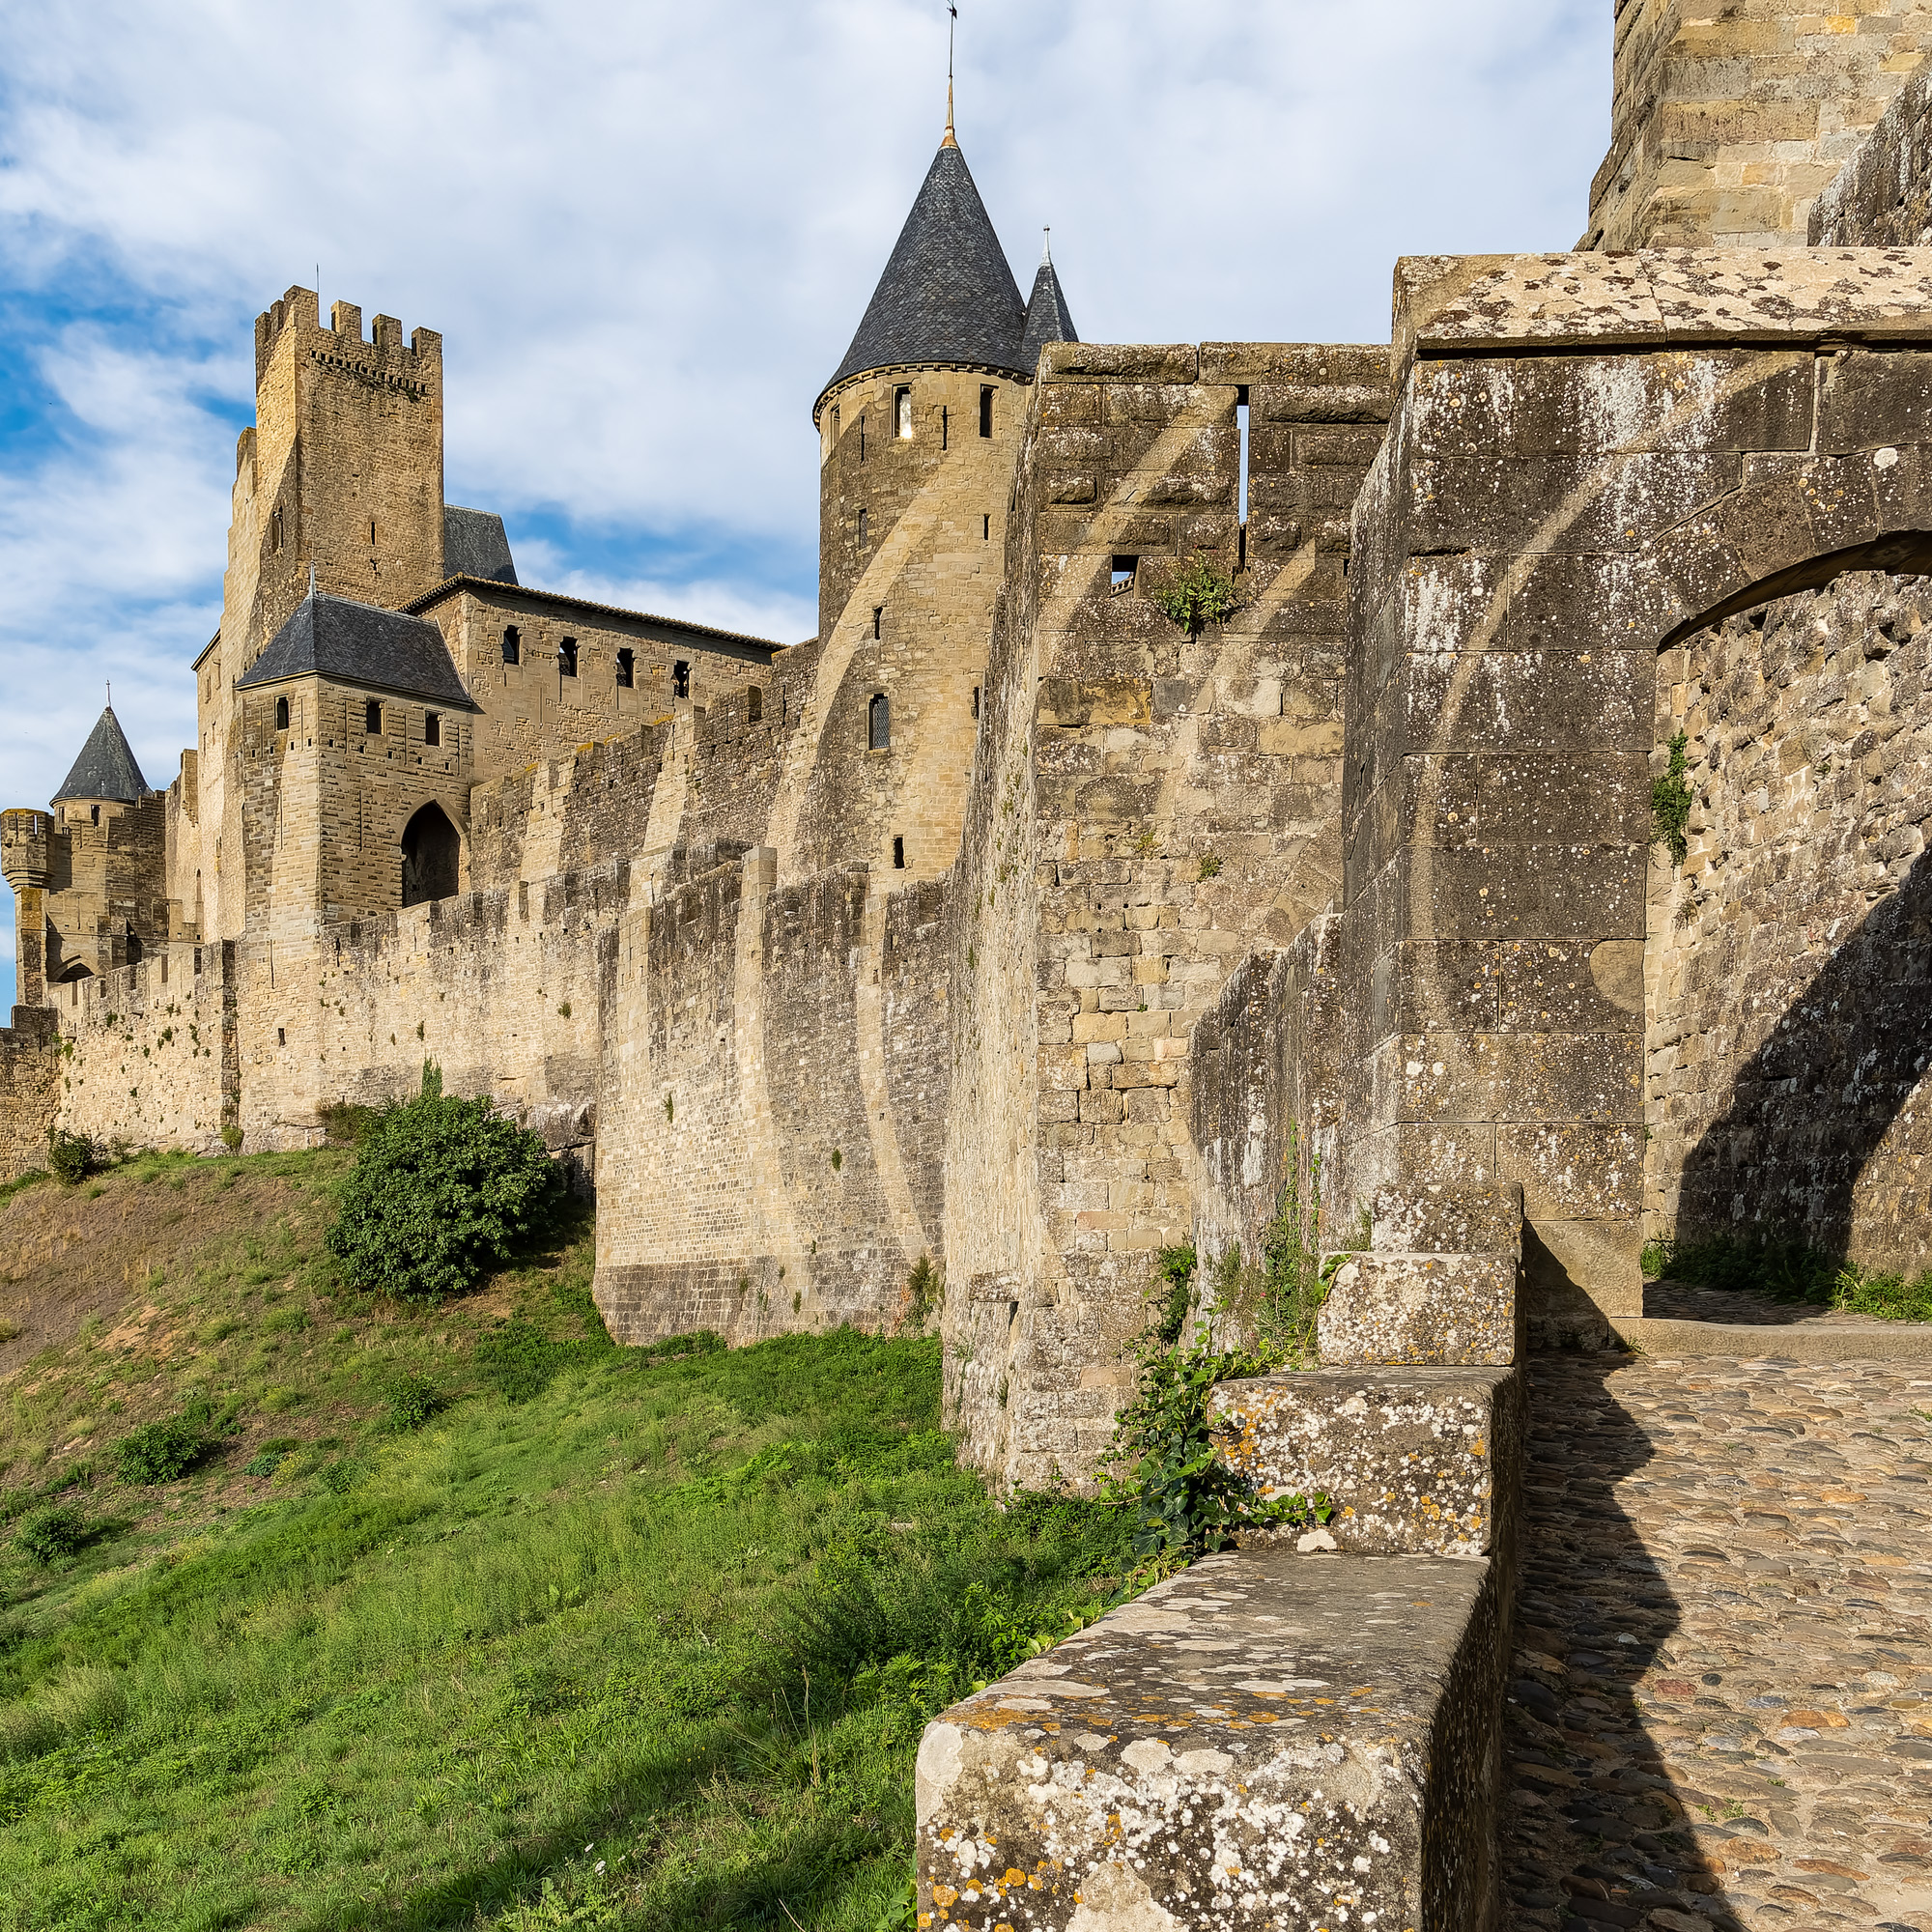 The fortress walls of Carcassonne